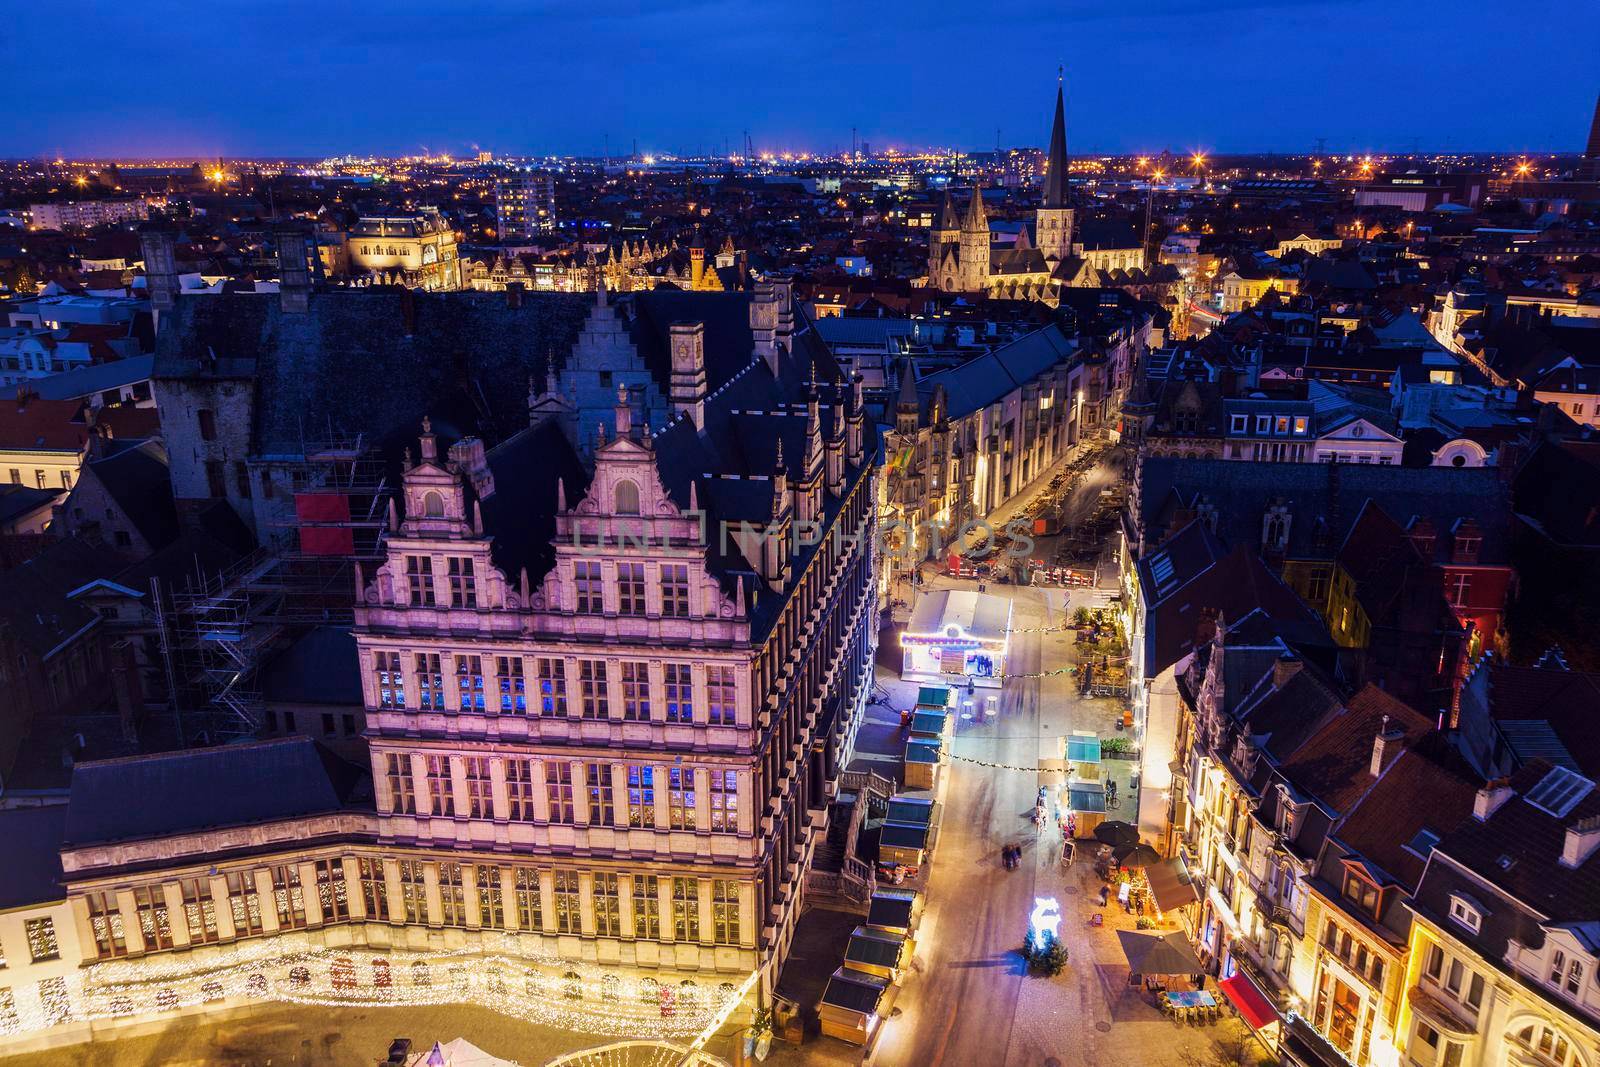 Night in Ghent - aerial view by benkrut